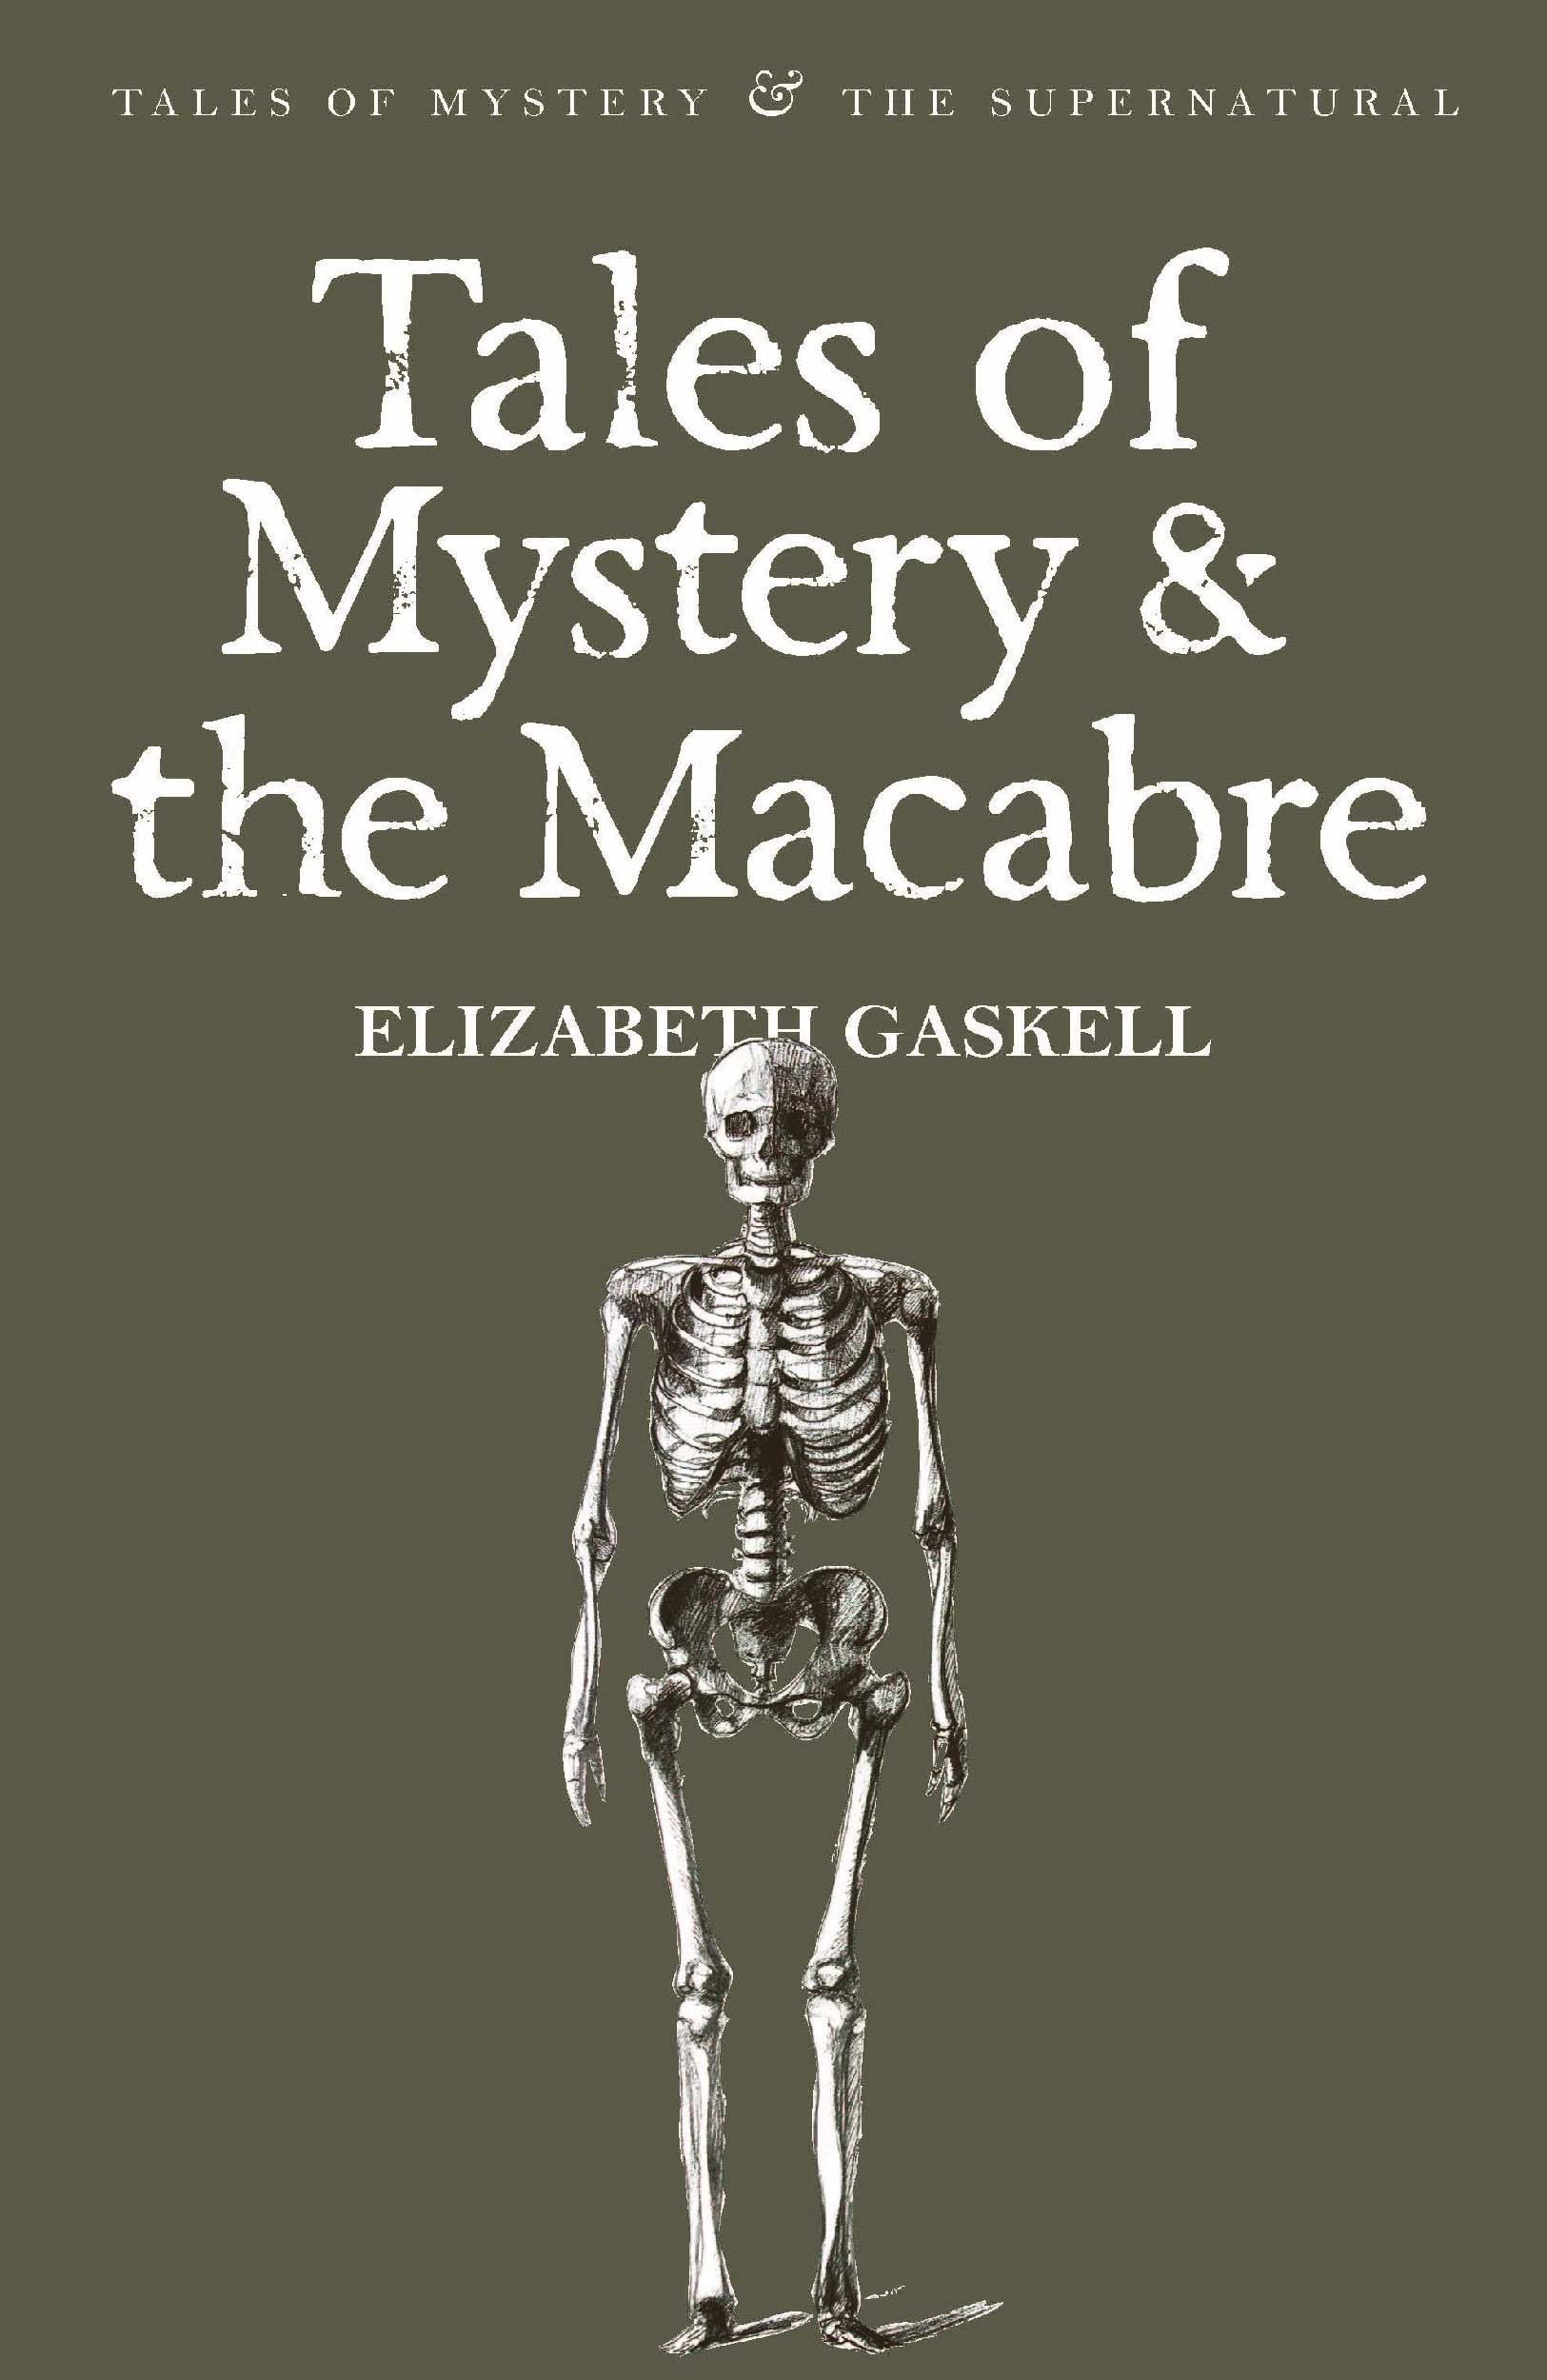 Tales of Mystery & the Macabre